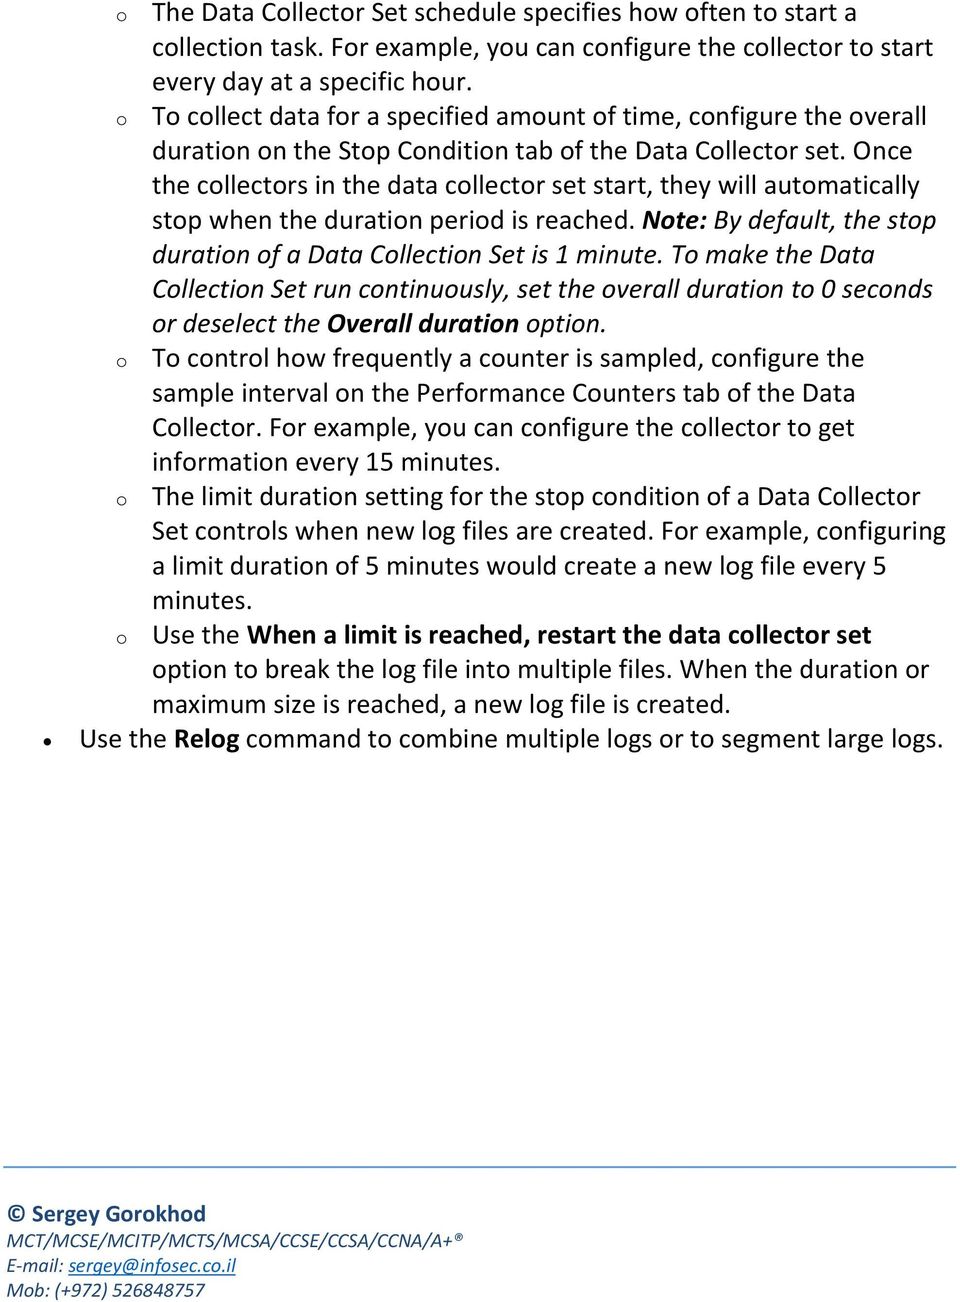 Once the collectors in the data collector set start, they will automatically stop when the duration period is reached. Note: By default, the stop duration of a Data Collection Set is 1 minute.